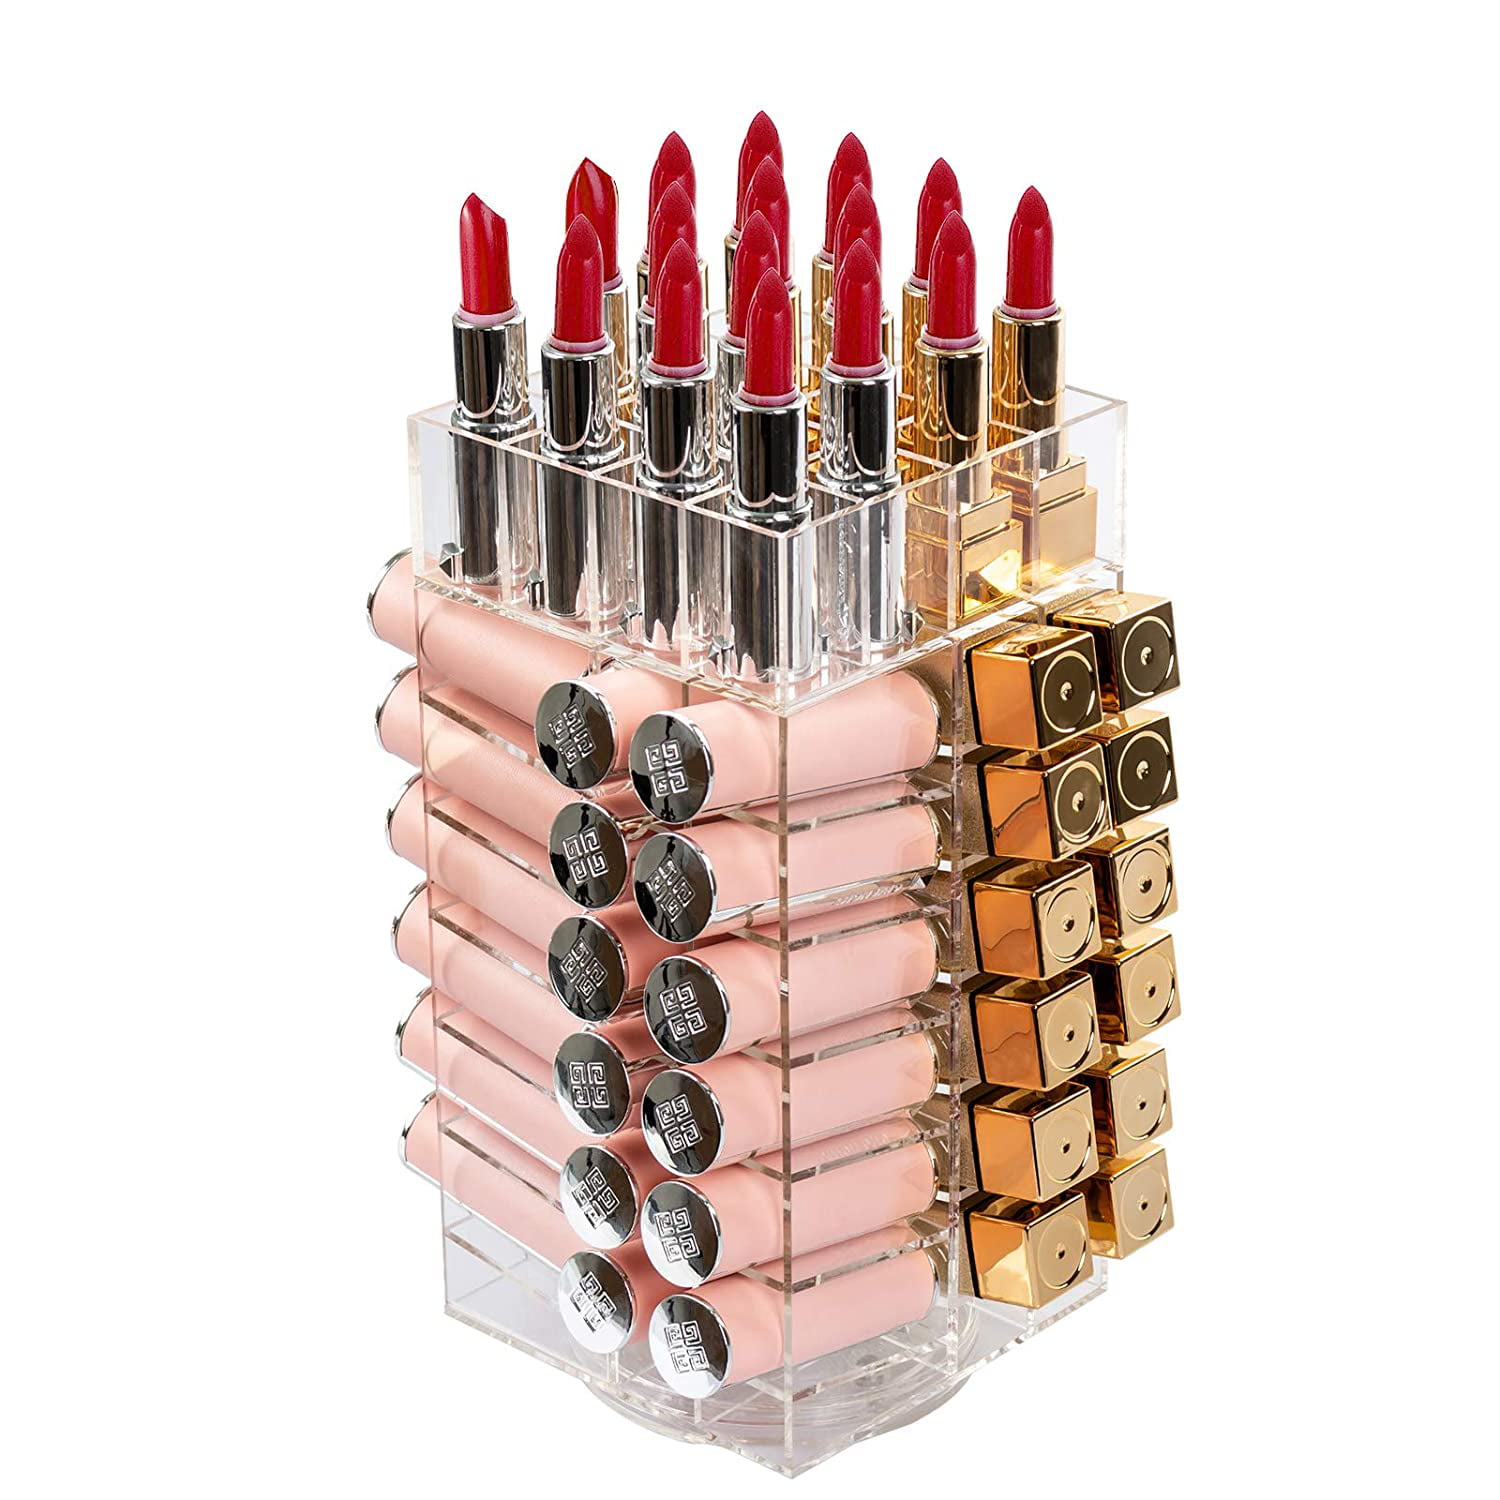 Acrylic Rotating 64 Lipstick Tower Organizer Spinning Lipstick Tower Lipgloss Holder with Removable Dividers Lipstick Holder